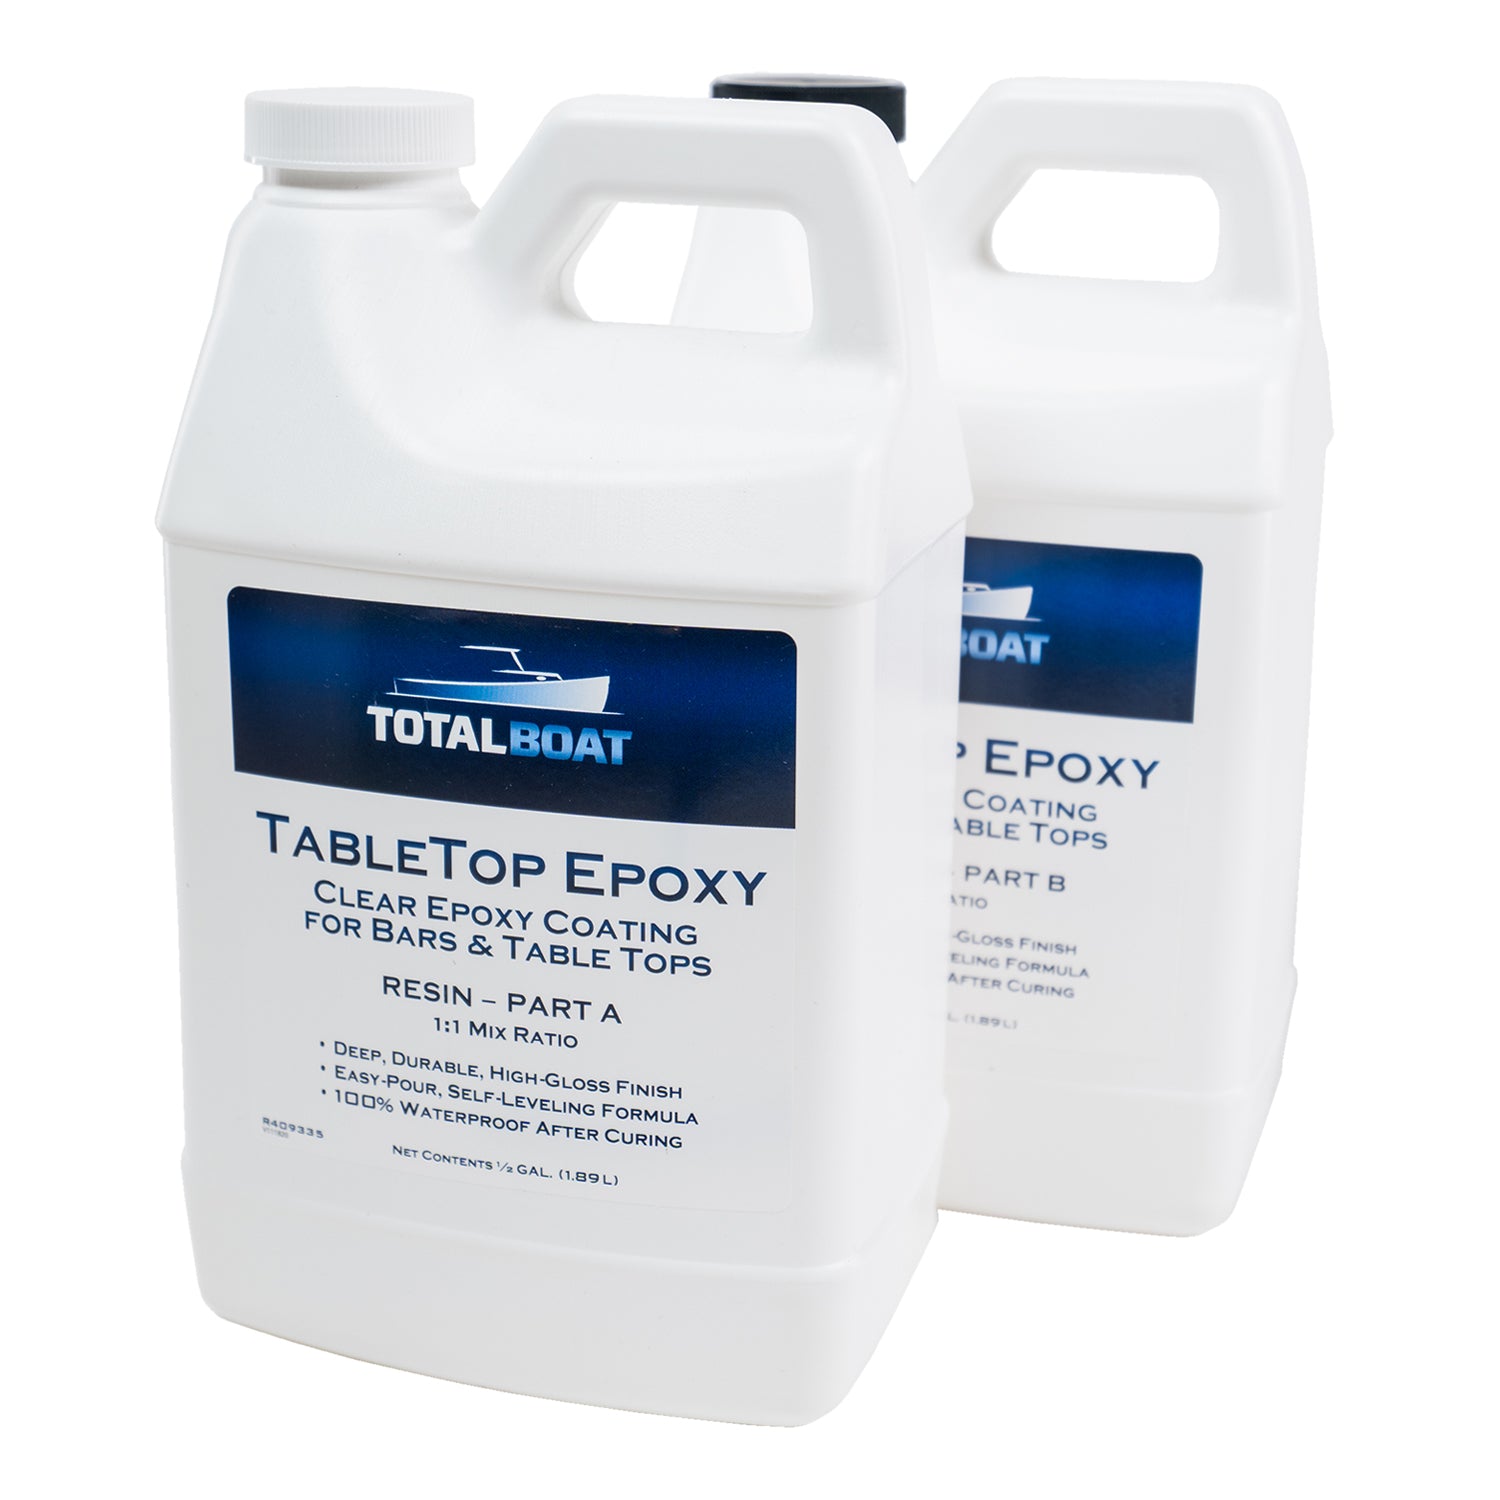 TotalBoat Table Top Epoxy Resin For Bar Tops and Tabletops